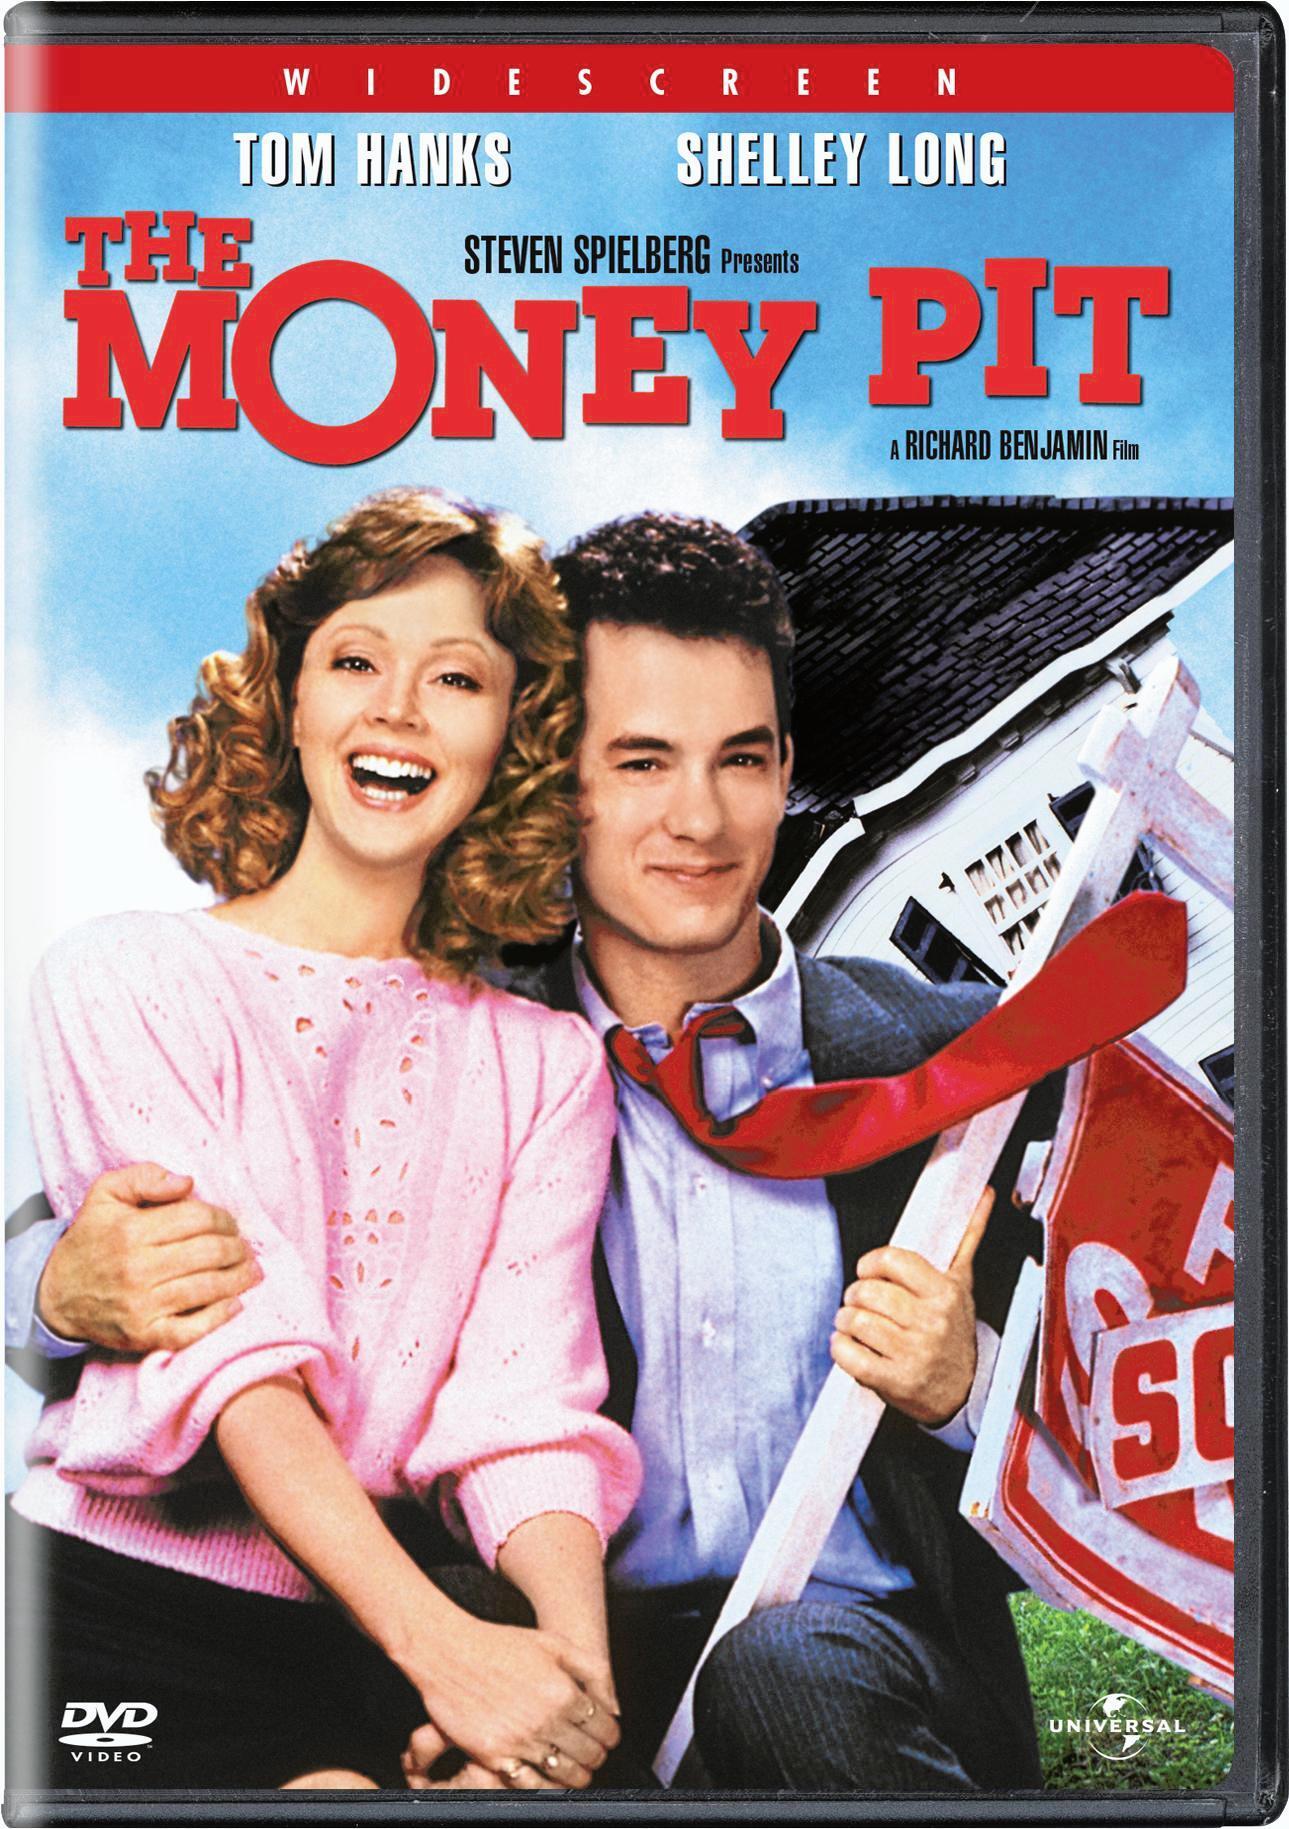 The Money Pit - DVD [ 1986 ]  - Comedy Movies On DVD - Movies On GRUV